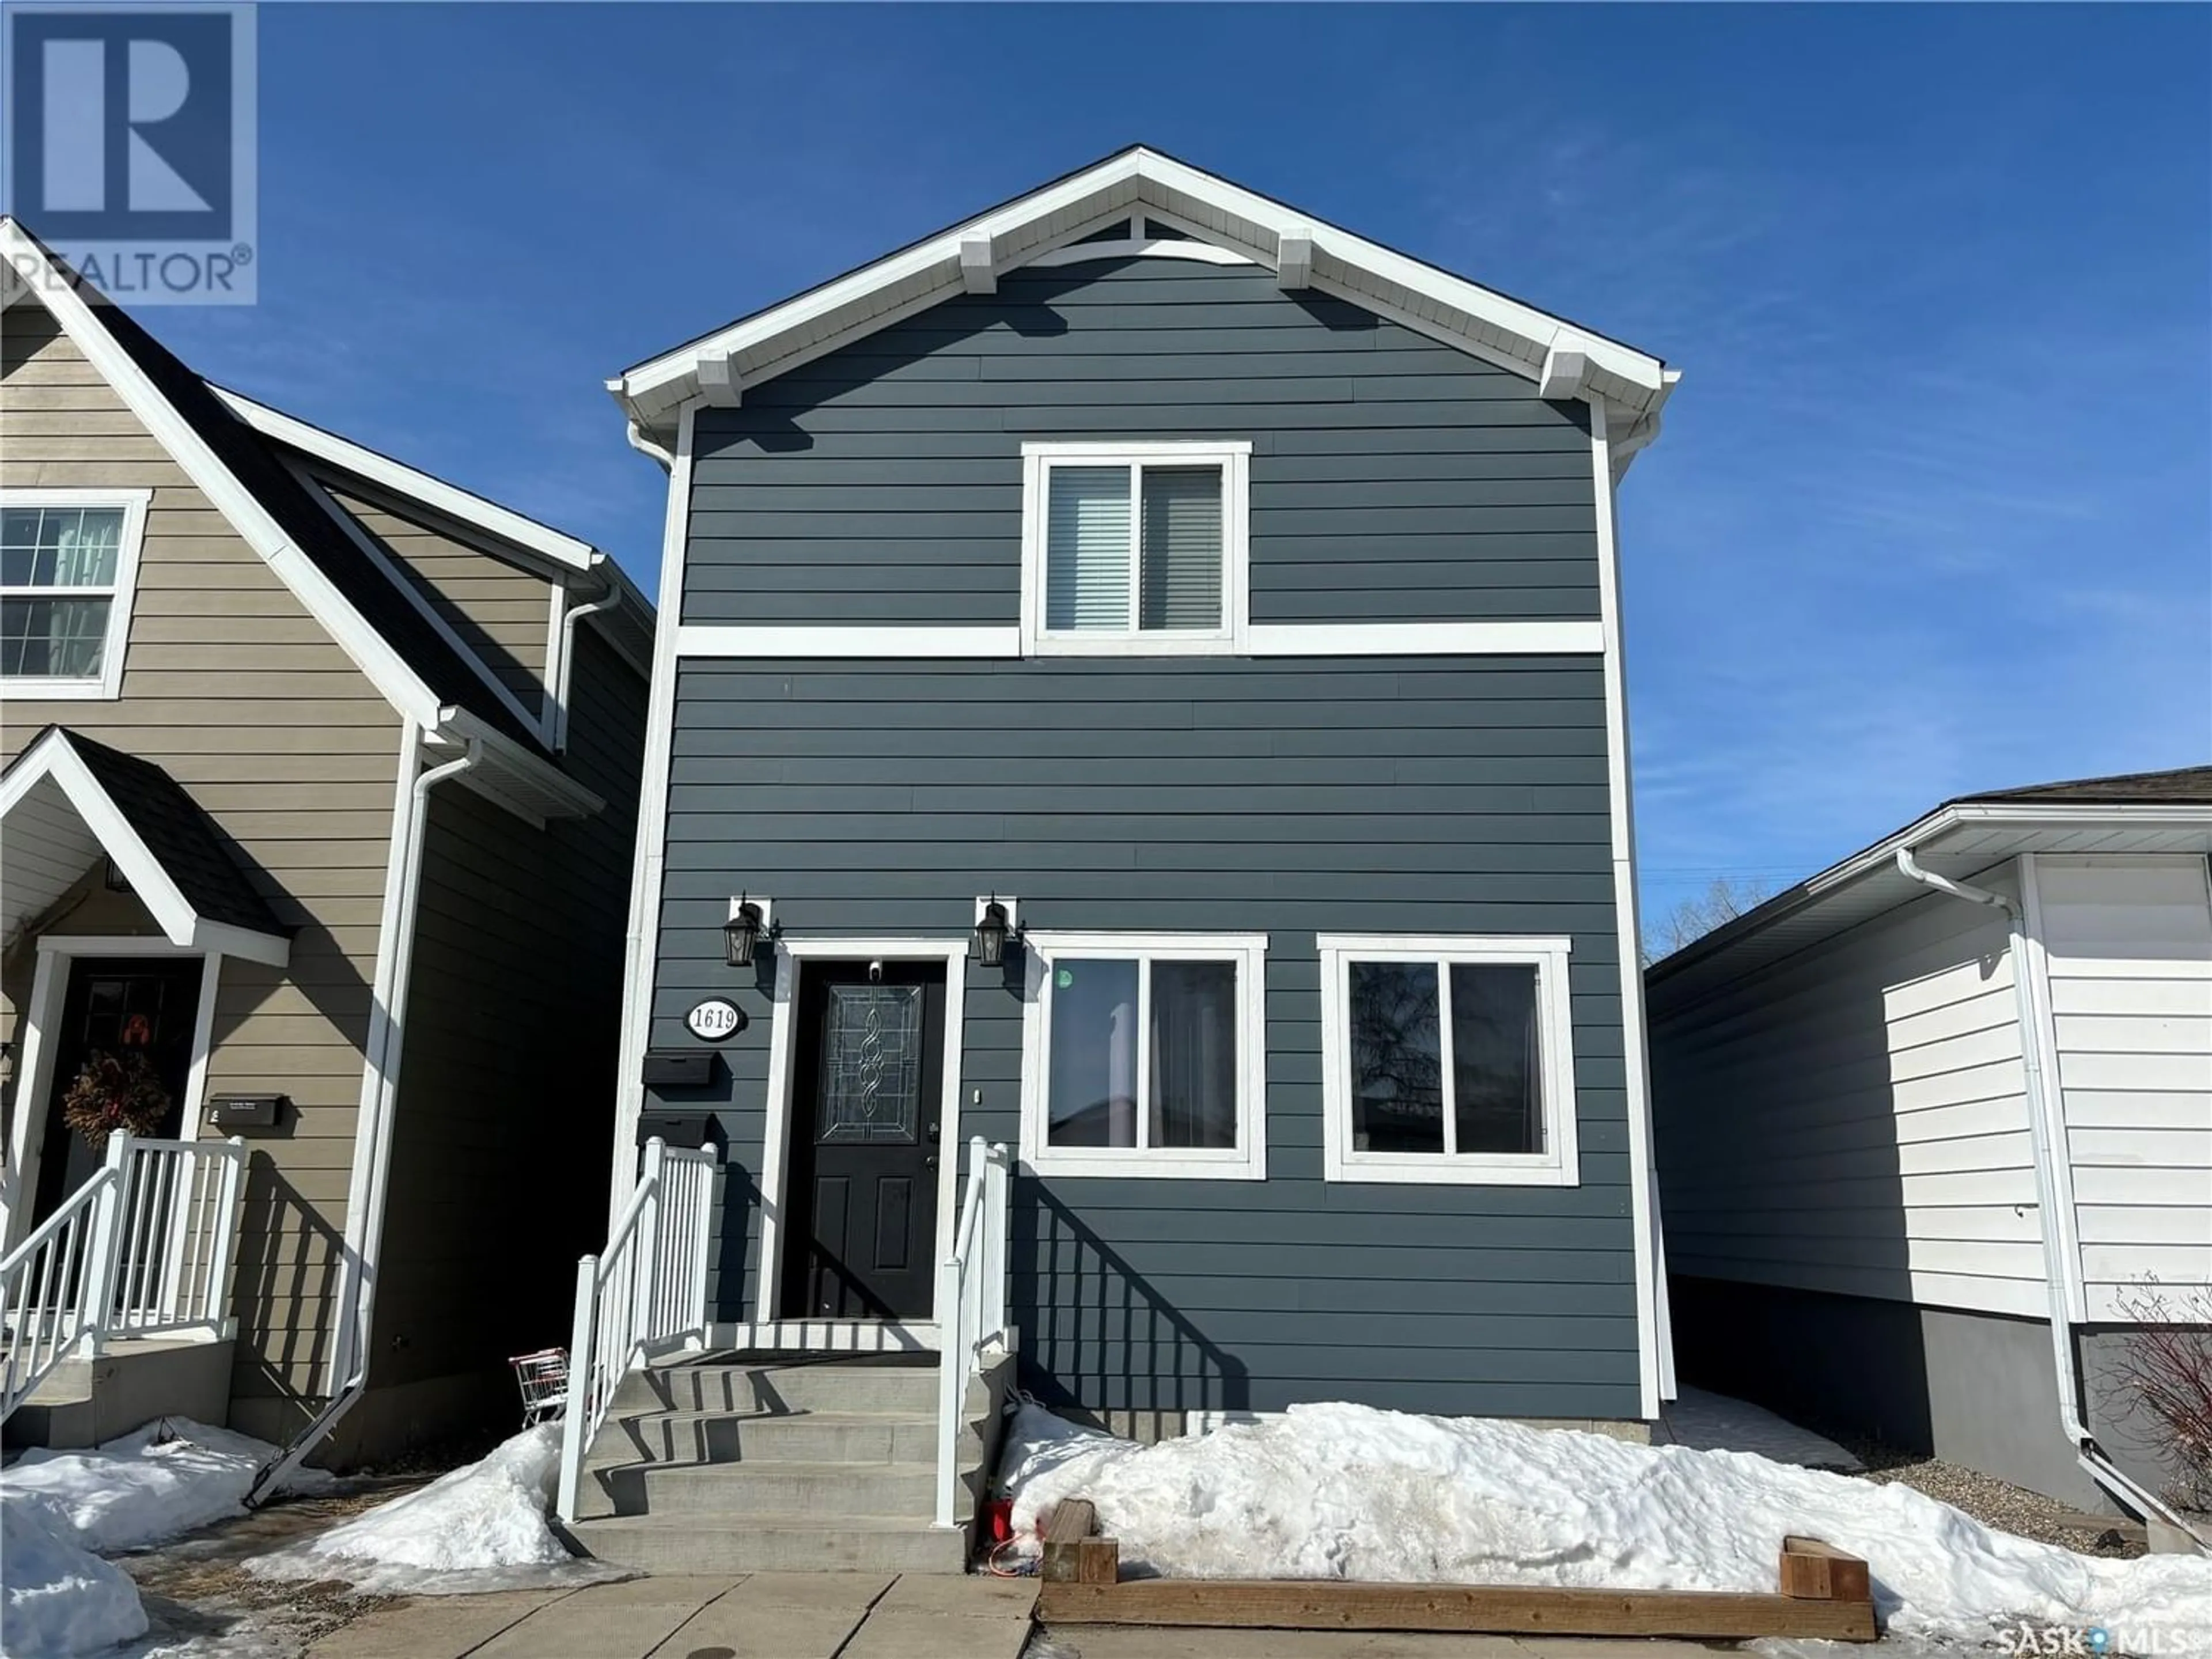 A pic from exterior of the house or condo for 1619 Prince Of Wales AVENUE, Saskatoon Saskatchewan S7K3E3